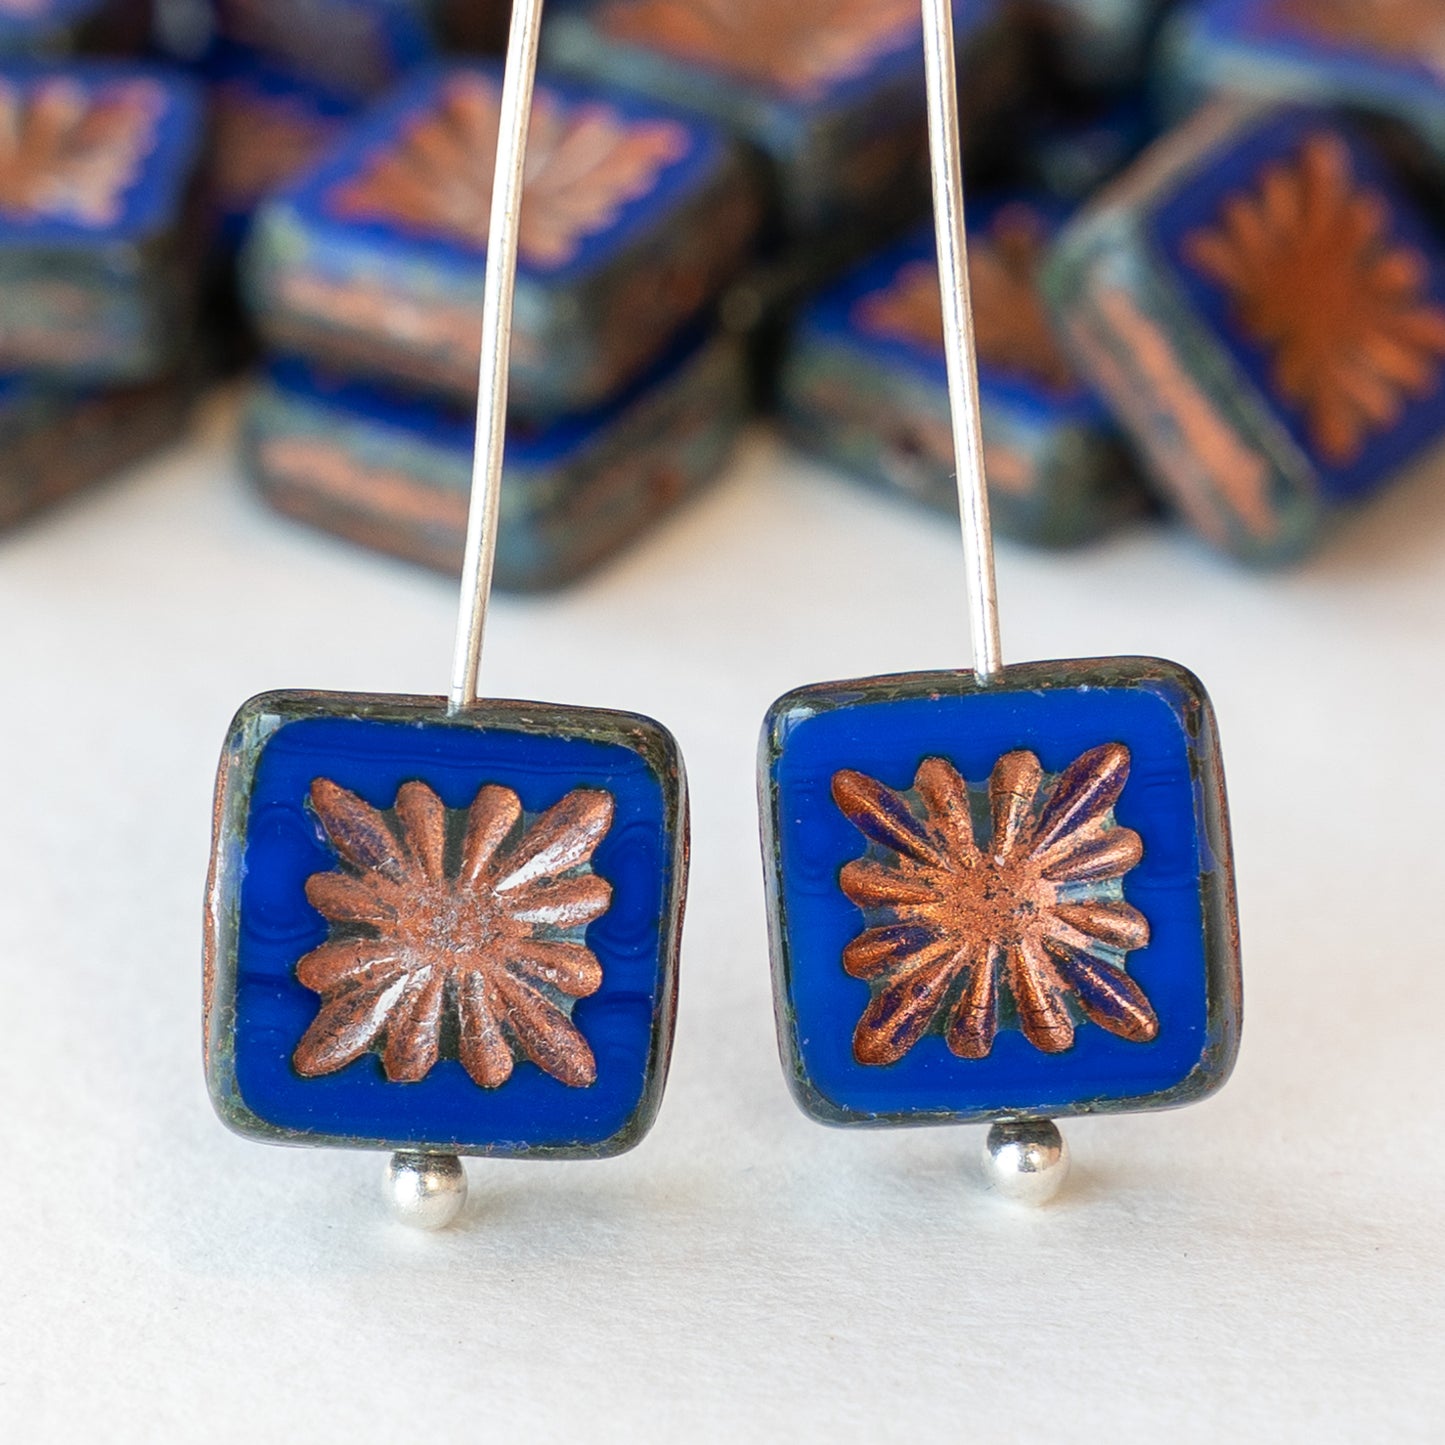 10mm Glass Tile Beads - Blue with Copper Wash - 10